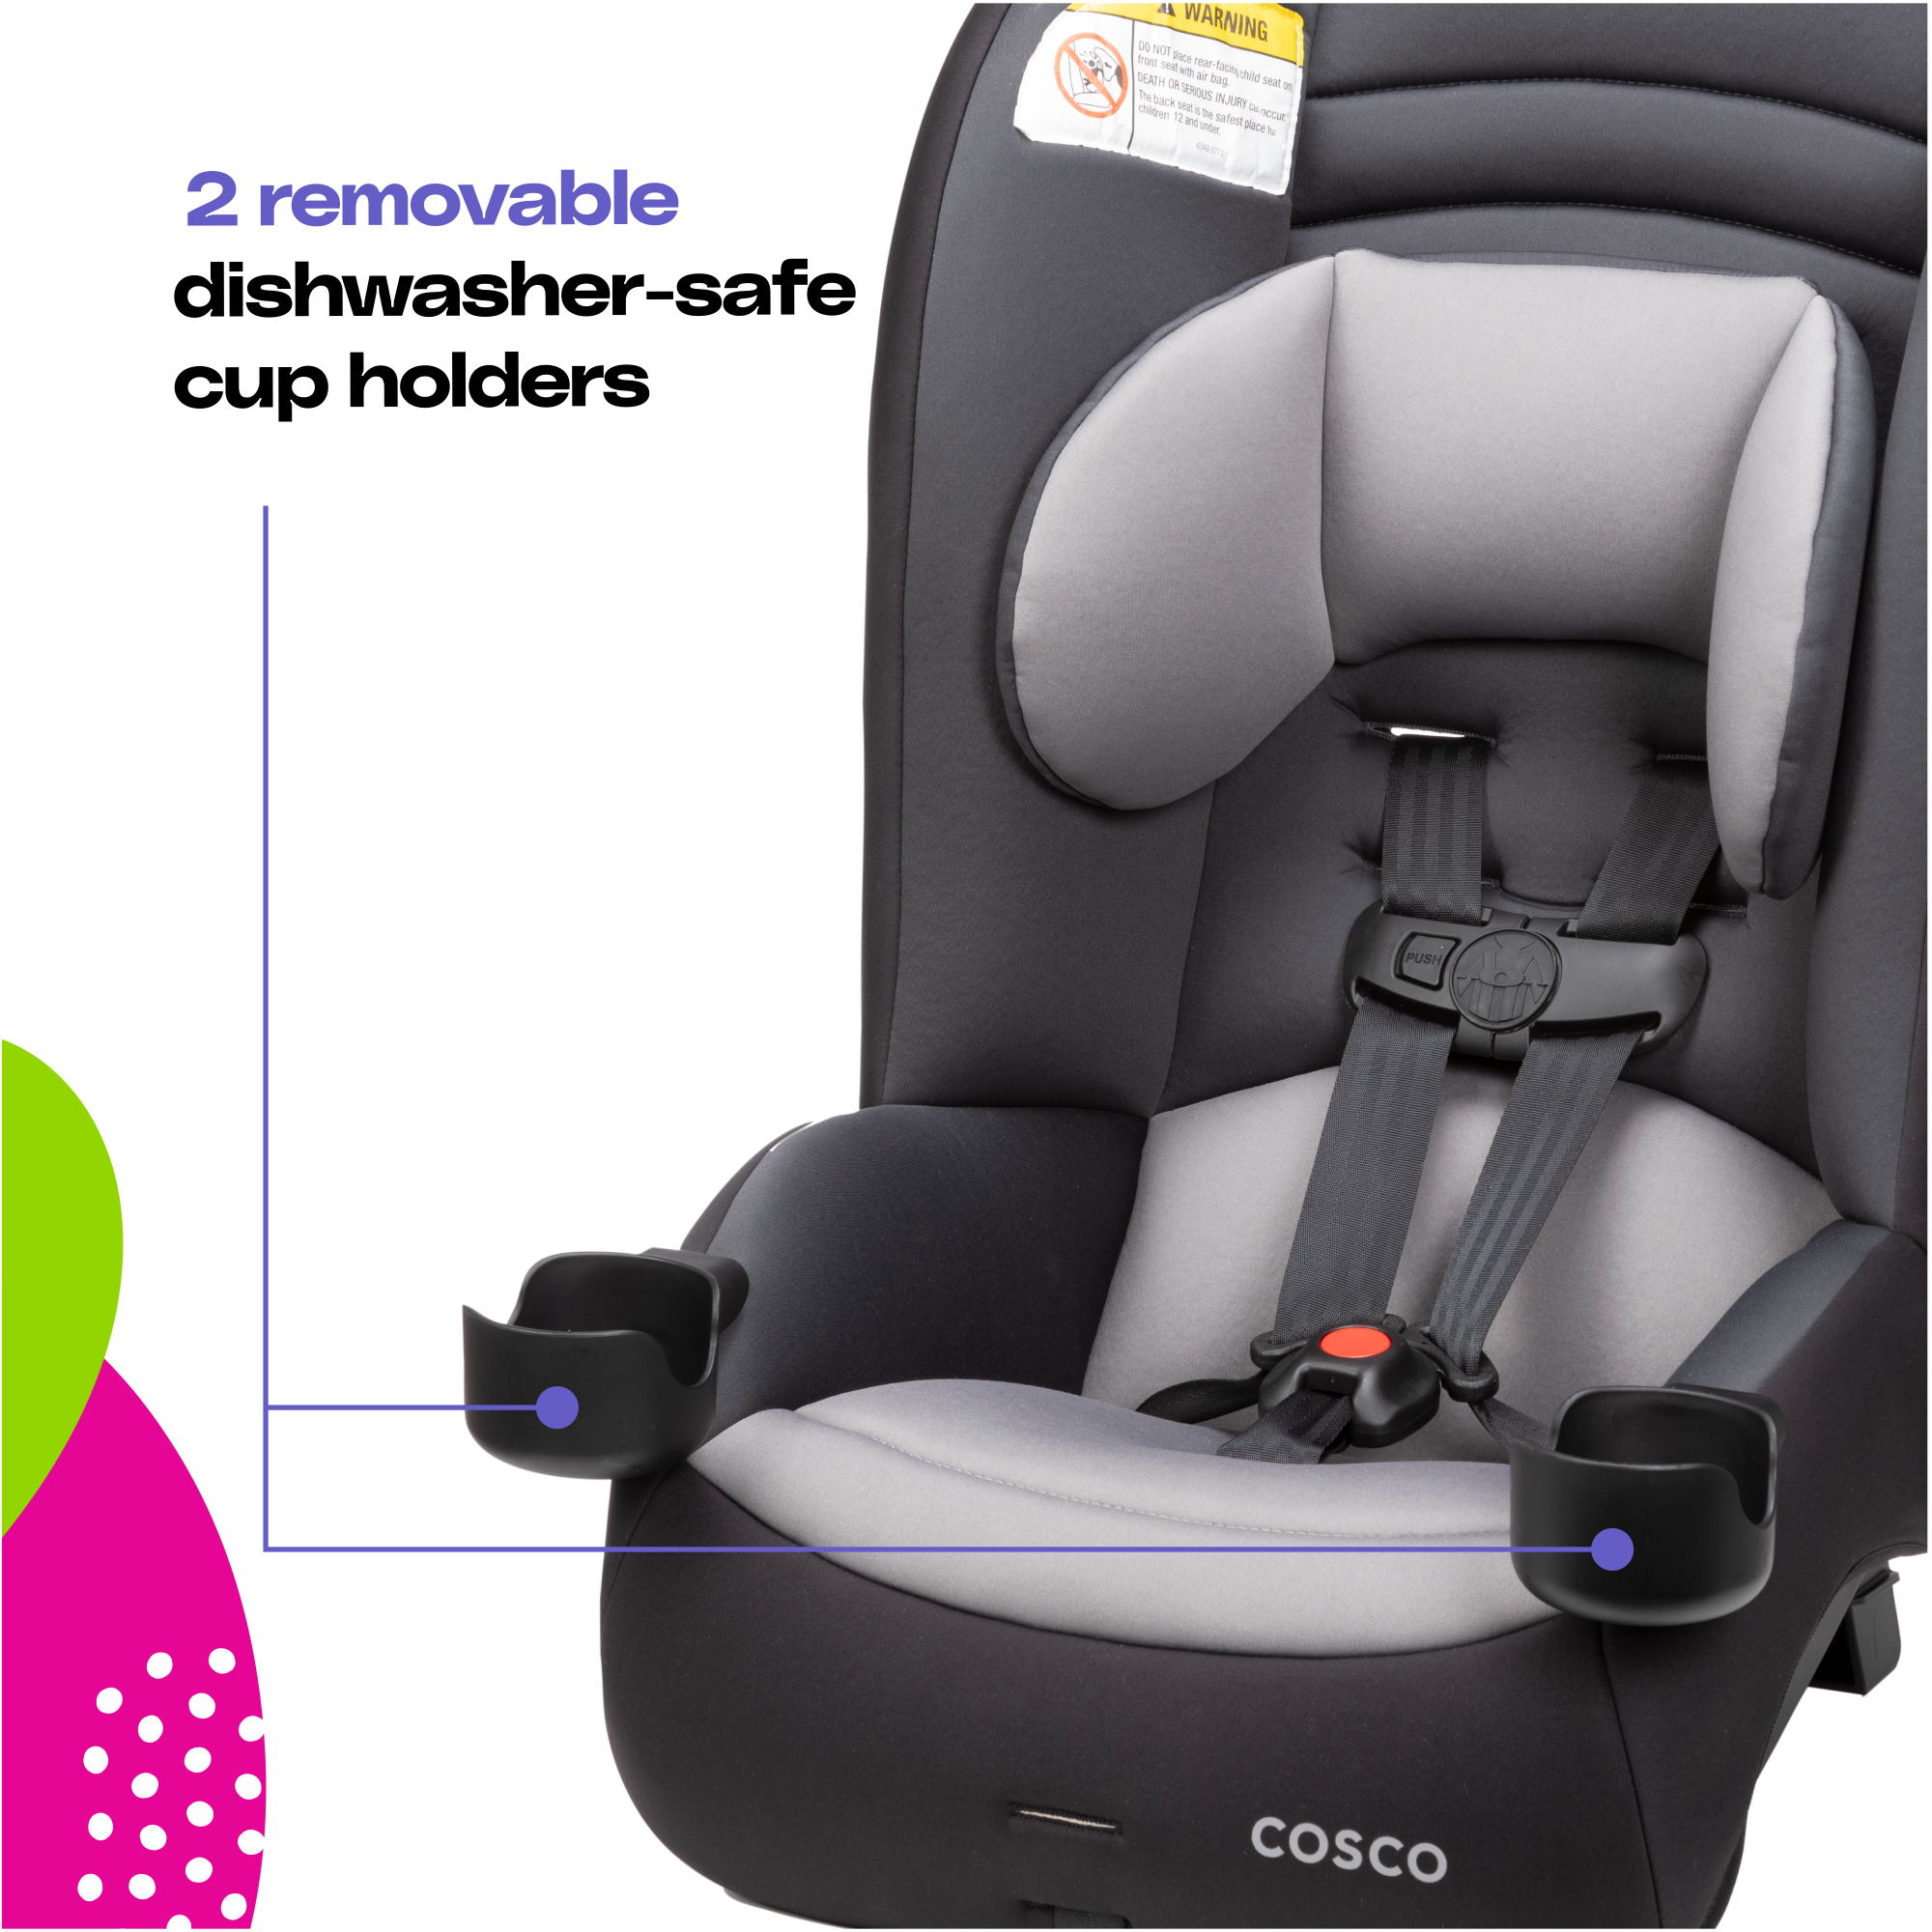 Cosco MightyFit LX Convertible Car Seat - 2 removable dishwasher-safe cup holders